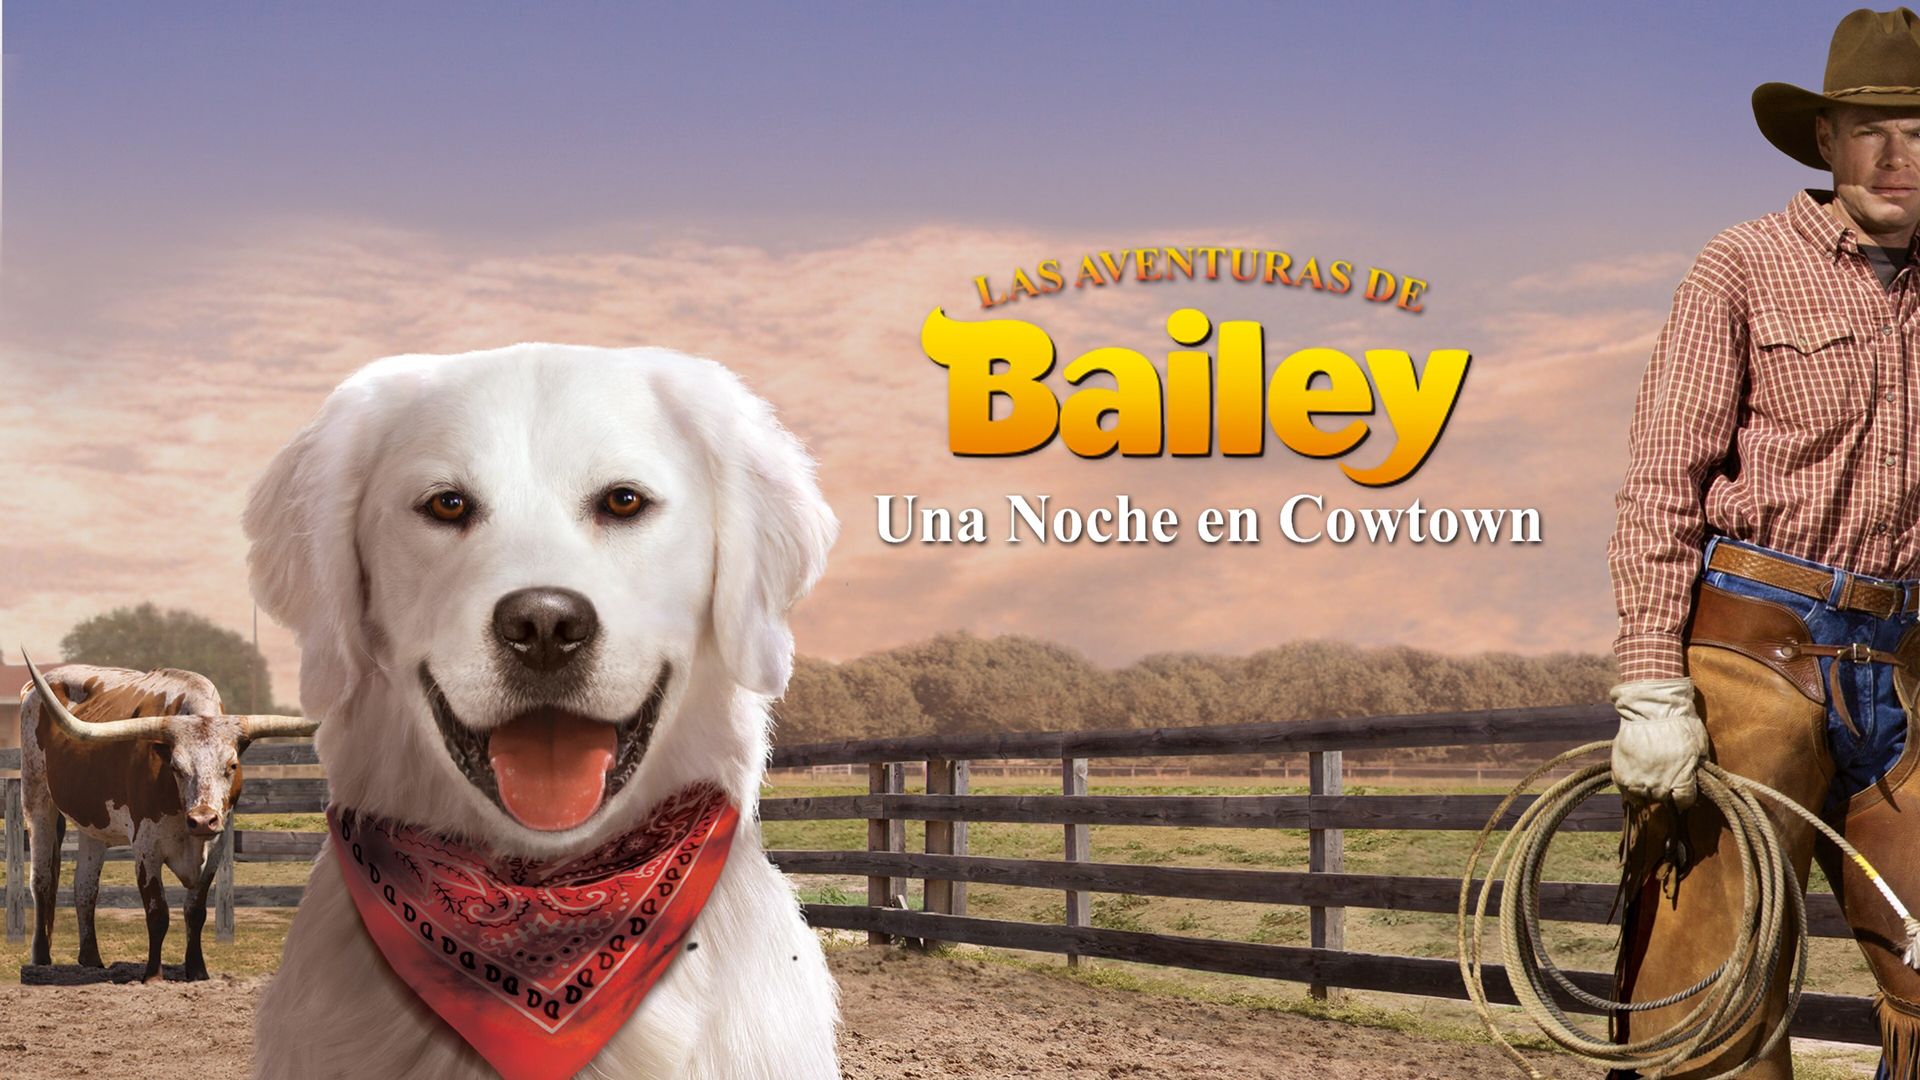 Adventures of Bailey: A Night in Cowtown Backdrop